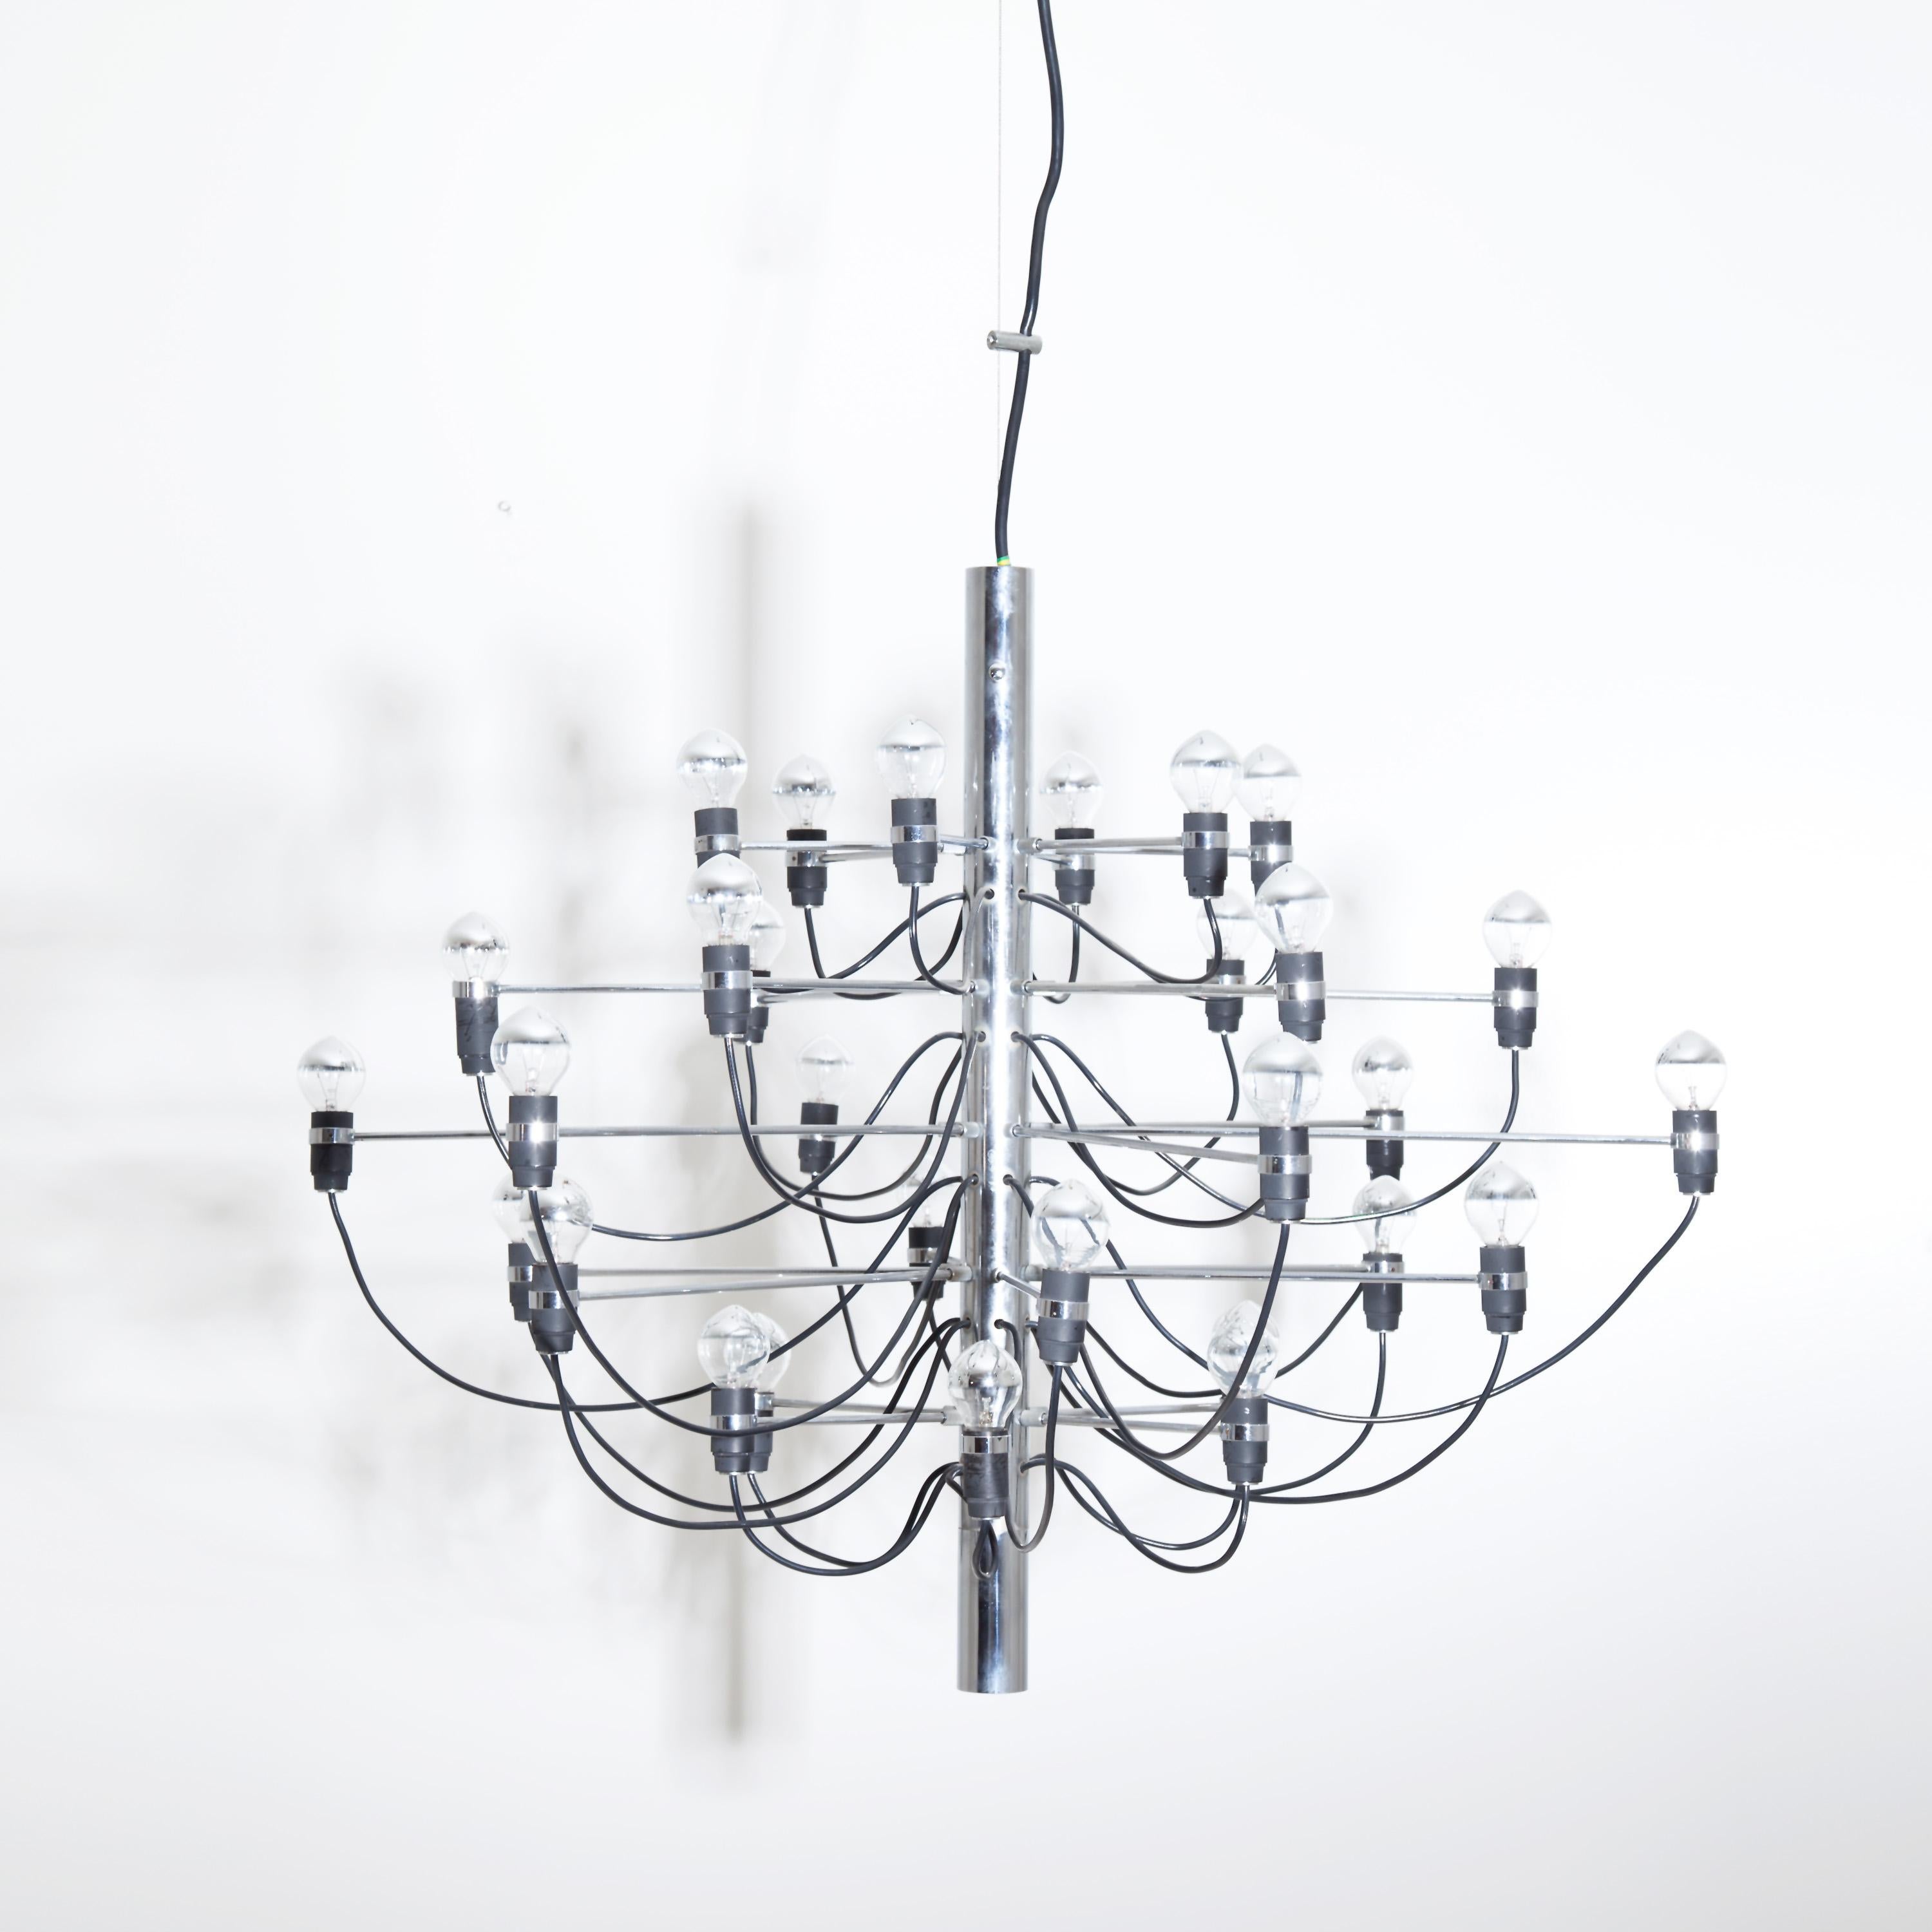 Large “2097” chandelier designed in 1958 by Gino Sarfatti and produced by Arteluce Milano. Radially arranged chandelier arms with black cables around a central cylindrical chrome-plated body. For the electrification we assume no liability and no